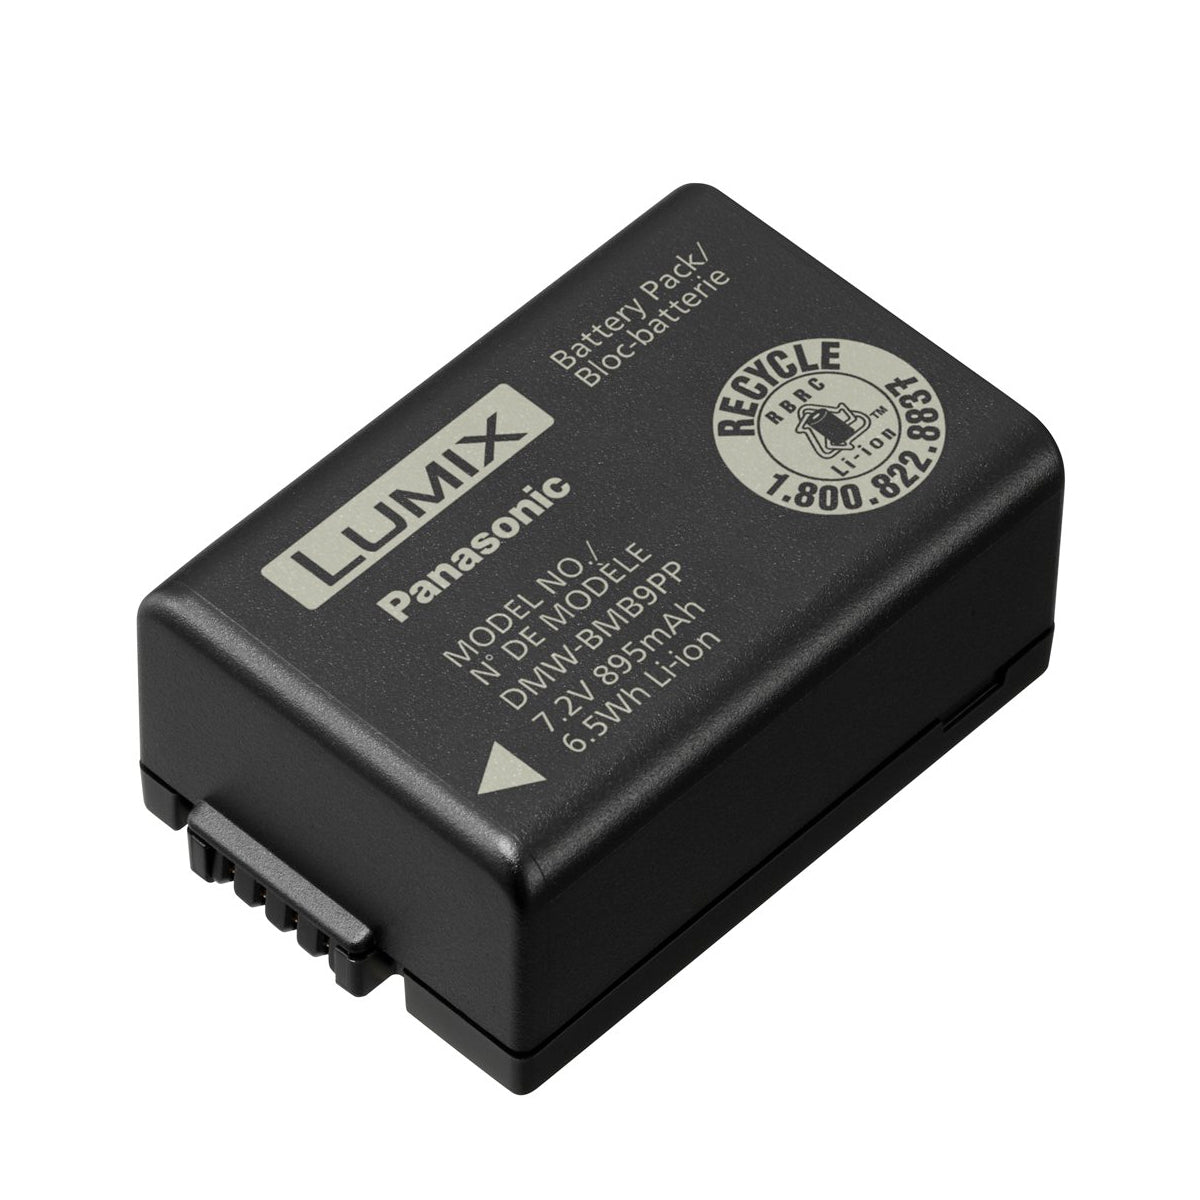 Rechargeable Lithium-Ion Battery - DMW-BMB9